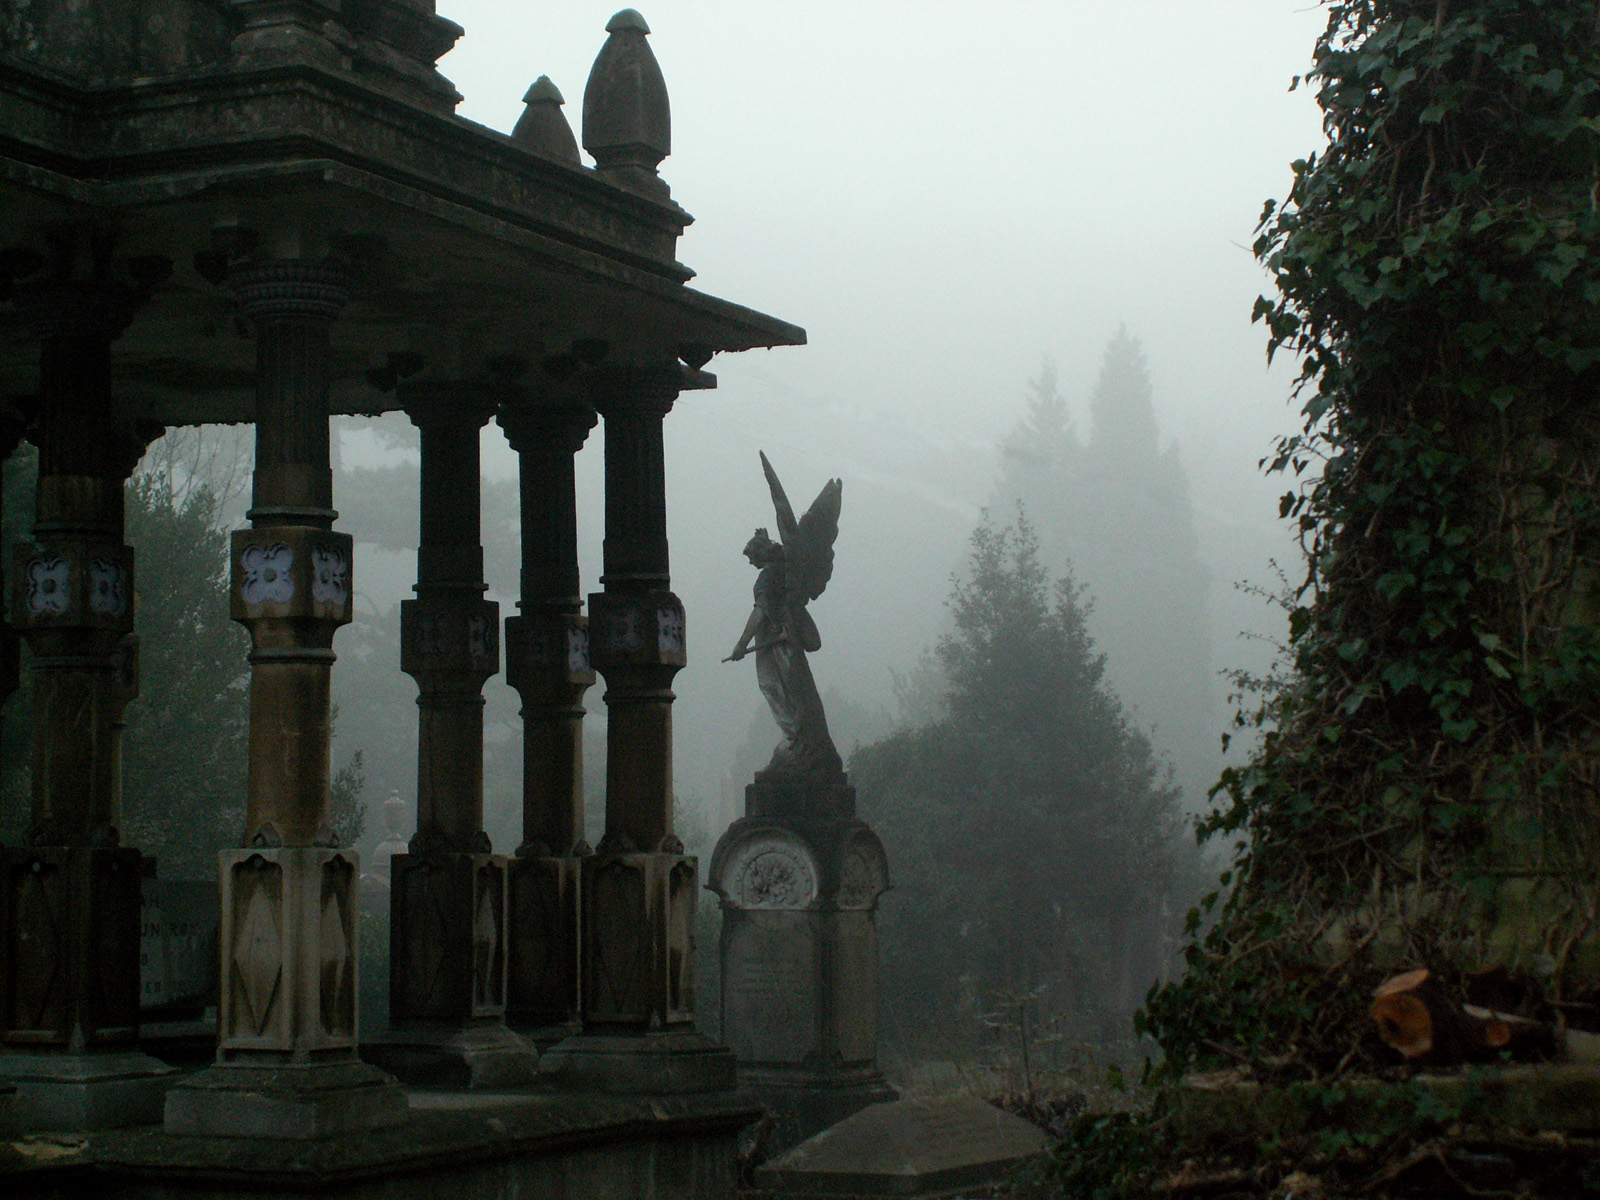 statues-in-the-mist-within-cemetery.jpg